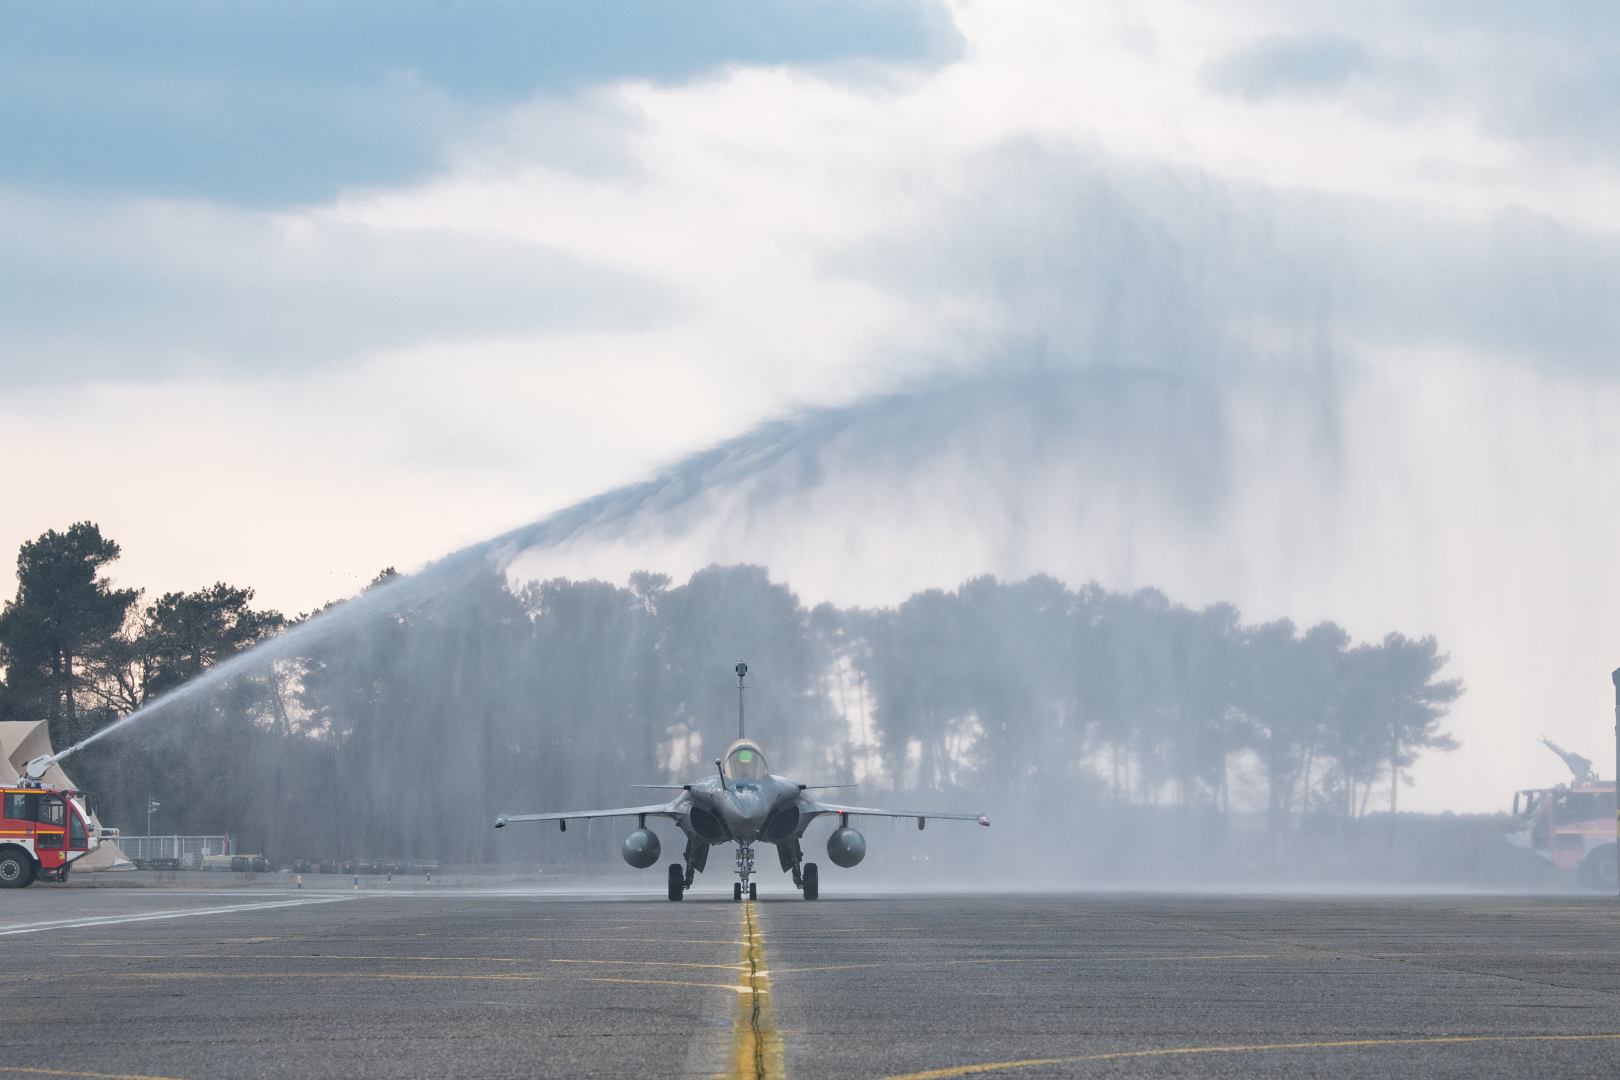 The Rafale F4 was christened by the air firefighters at the 118 air base of Mont-de-Marsan